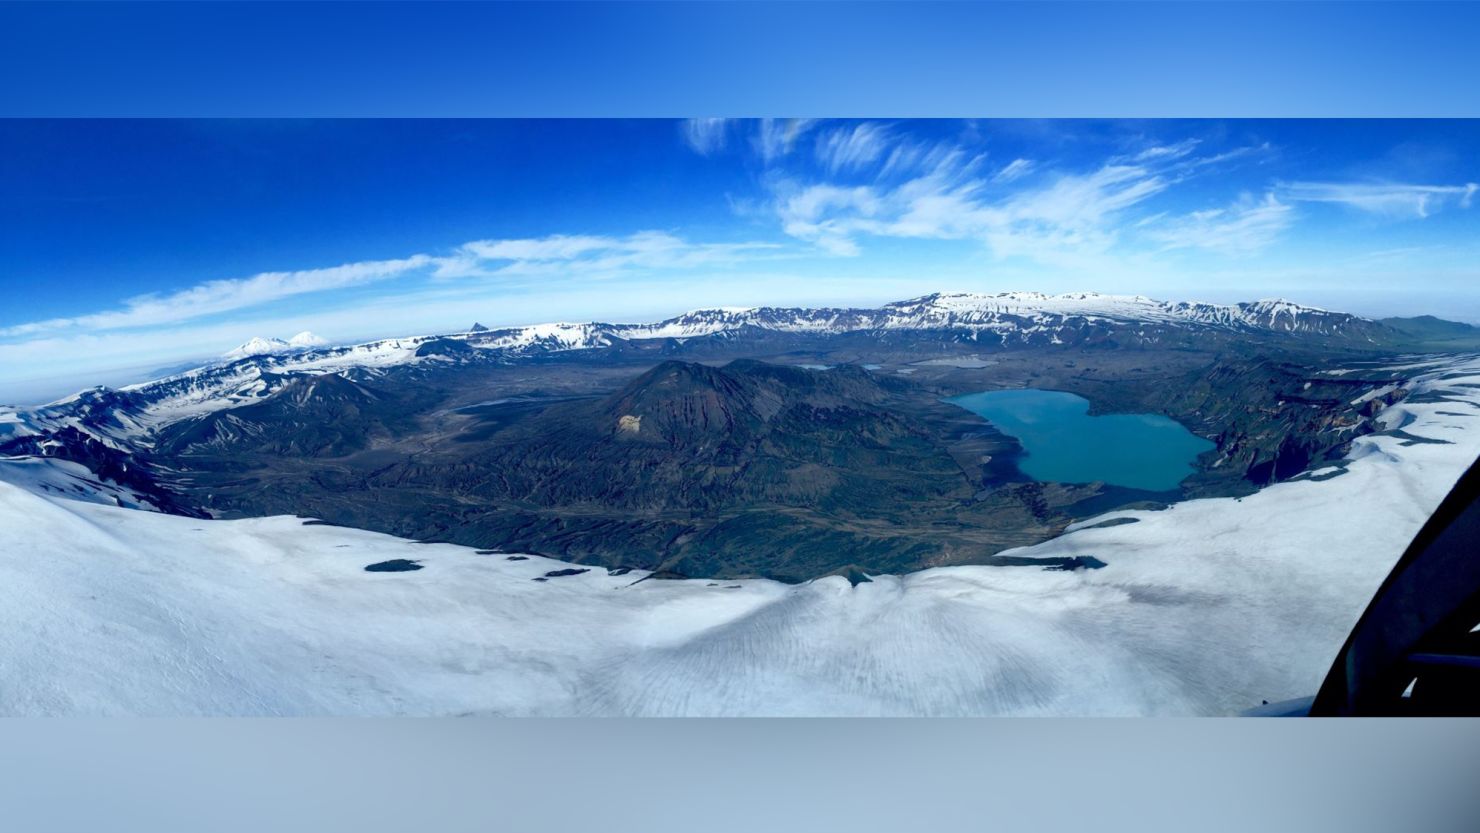 The 10-kiometer-wide crater on Alaska's Umnak Island formed during the eruption of the Okmok volcano in  43 BCE. This massive eruption caused among the most extreme Northern Hemisphere weather conditions of the past 2,500 years.